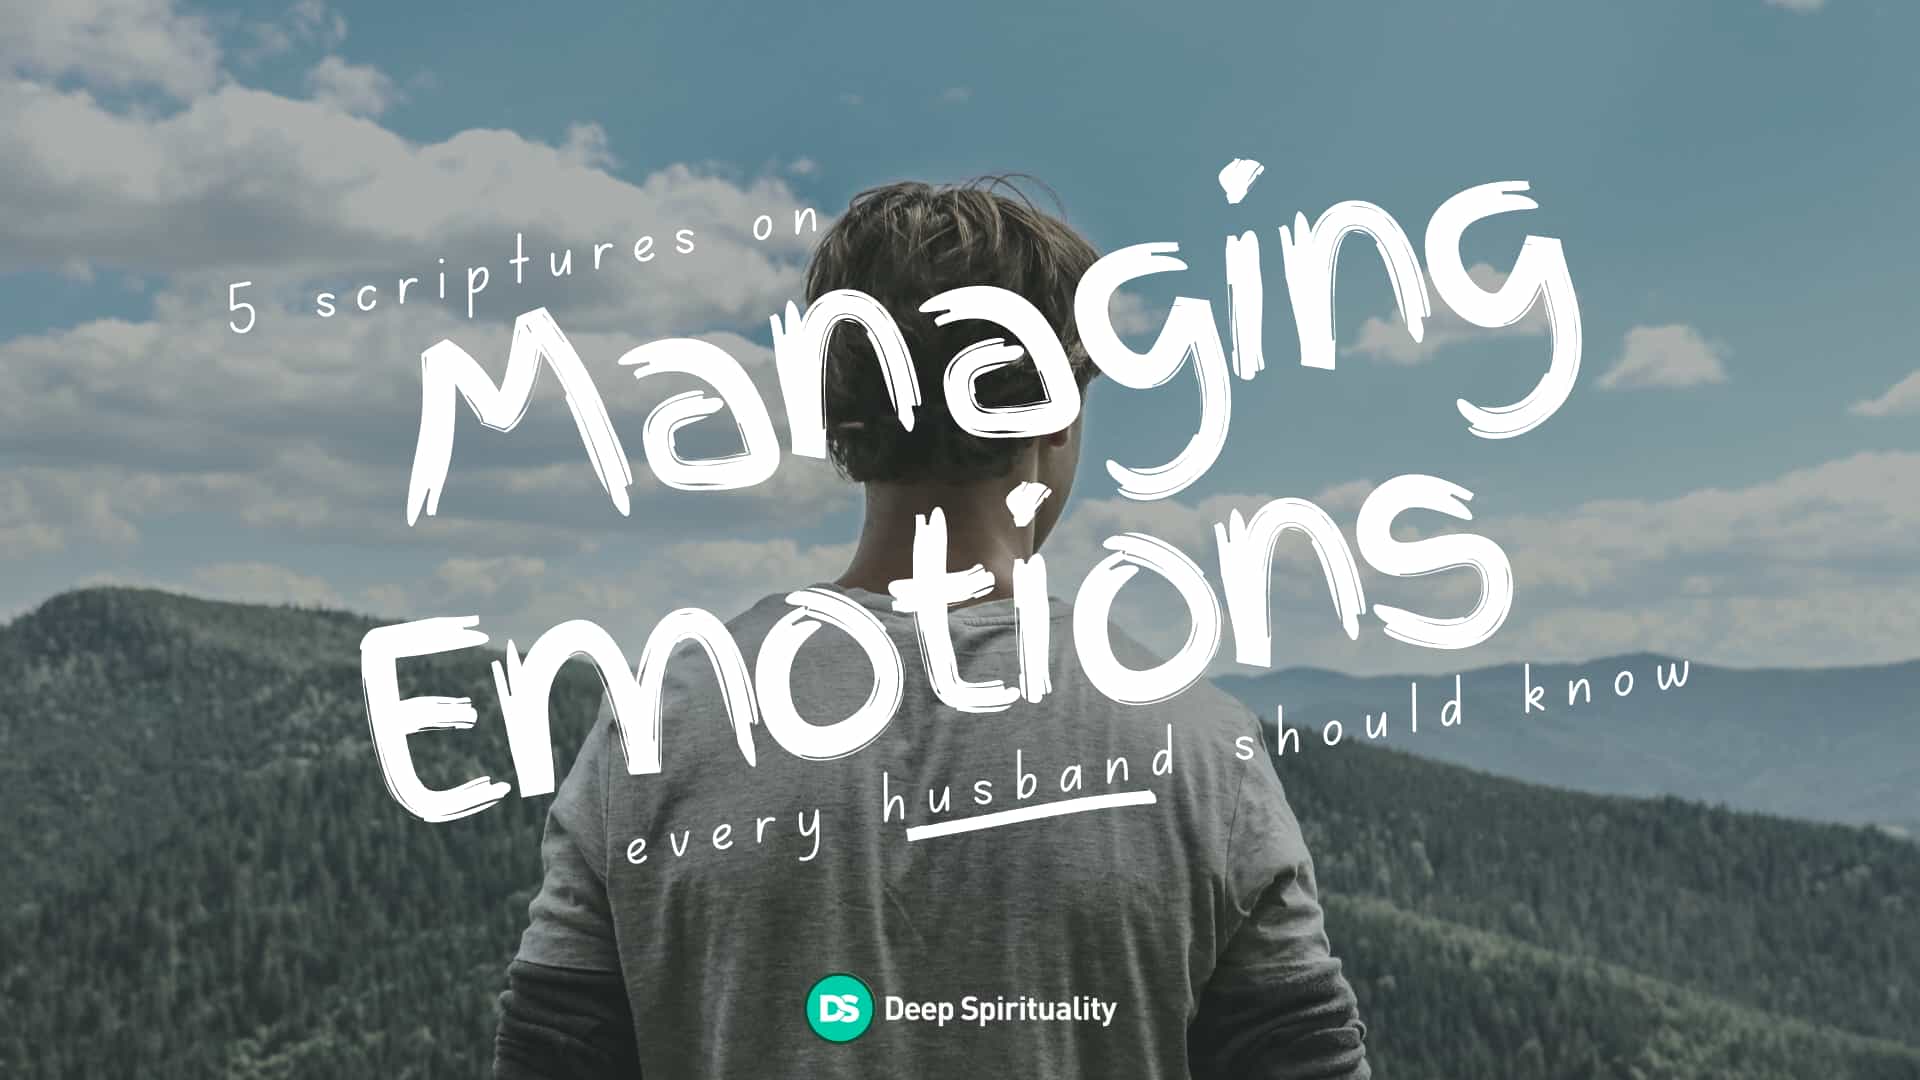 5 Scriptures on Managing Emotions Every Husband Should Know 4